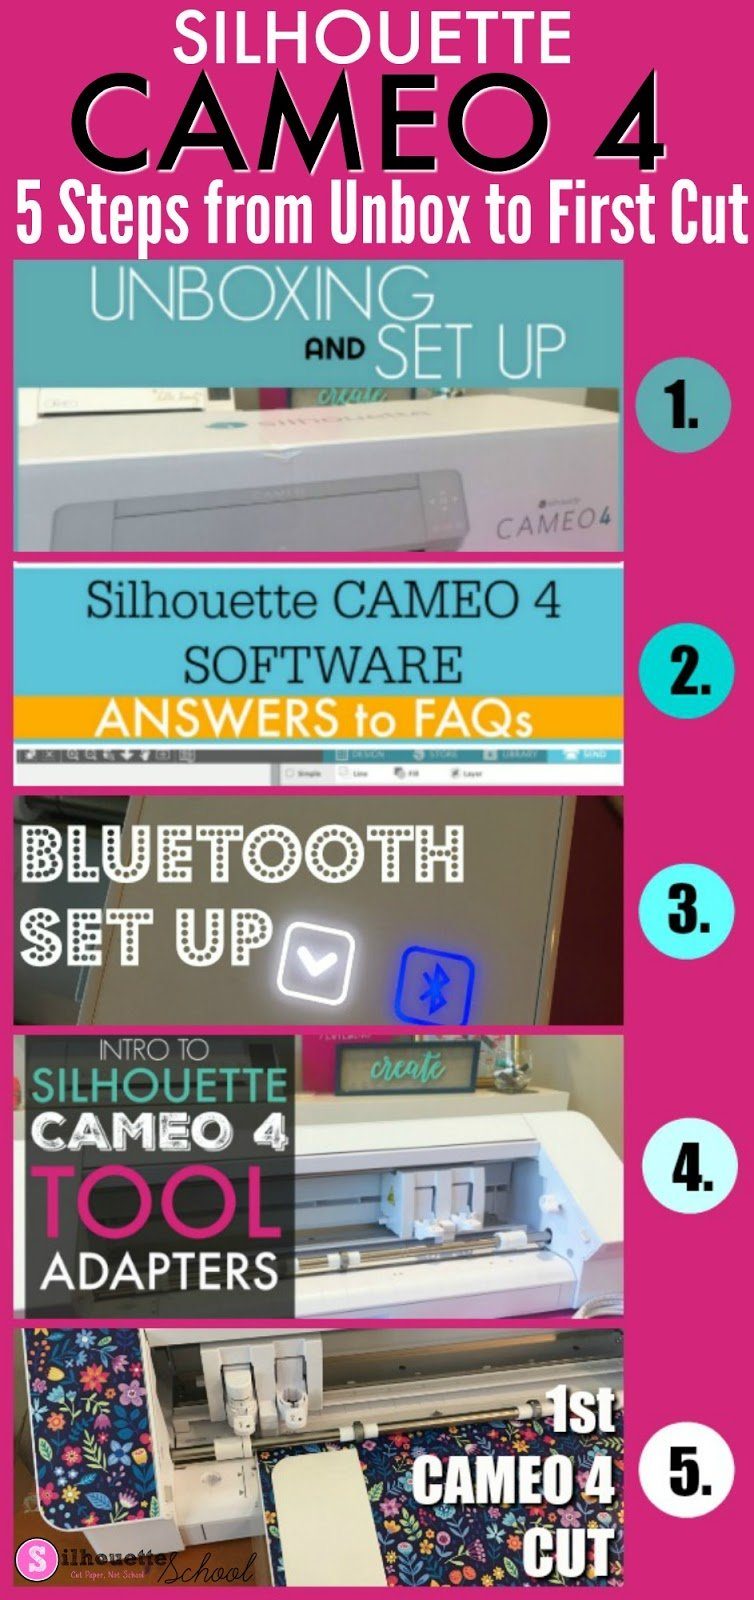 How To Use the Silhouette Cameo 3: A Tutorial